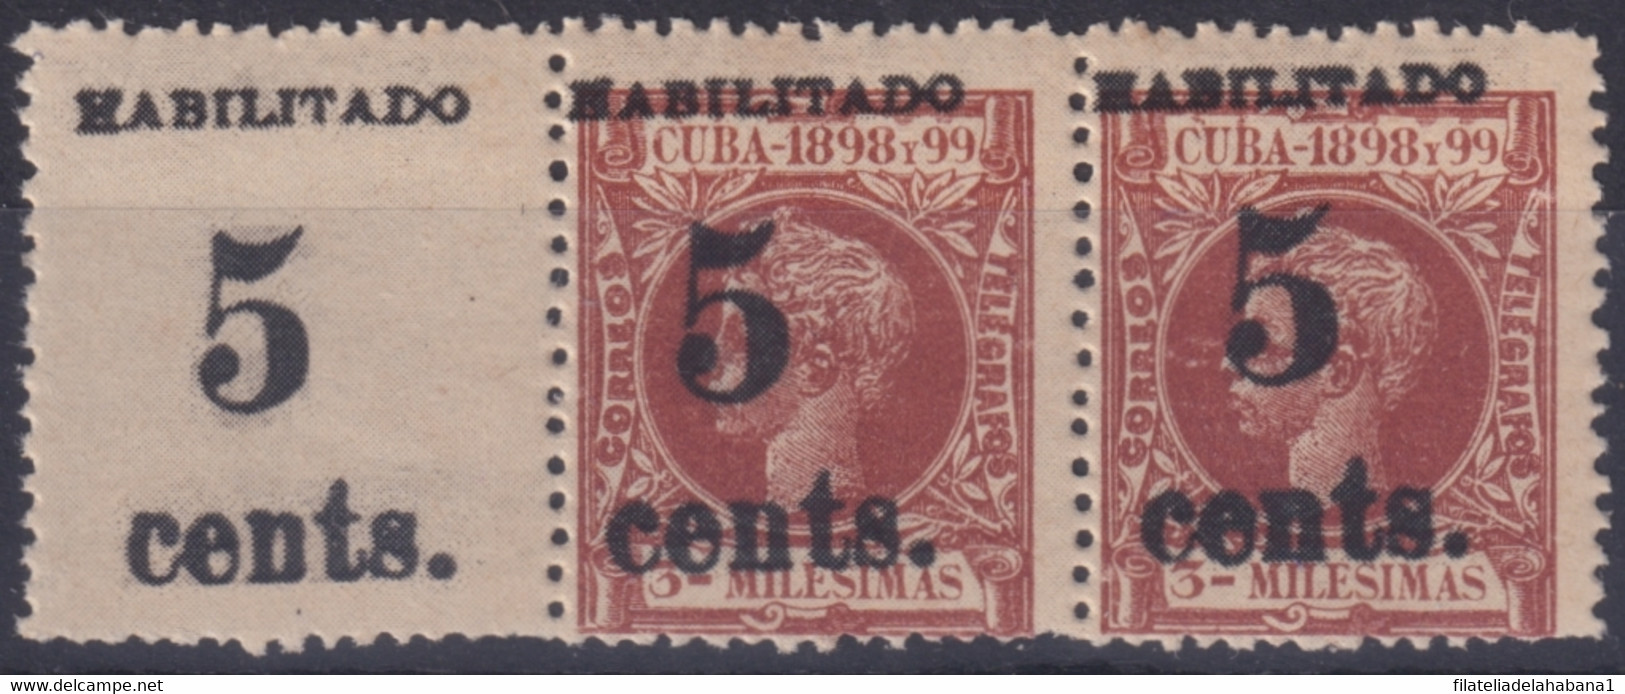 1899-494 CUBA 1899 5c S. 3c US OCCUPATION 2th ISSUE FINE NUMBER PHILATELIC FORGERY. - Nuevos